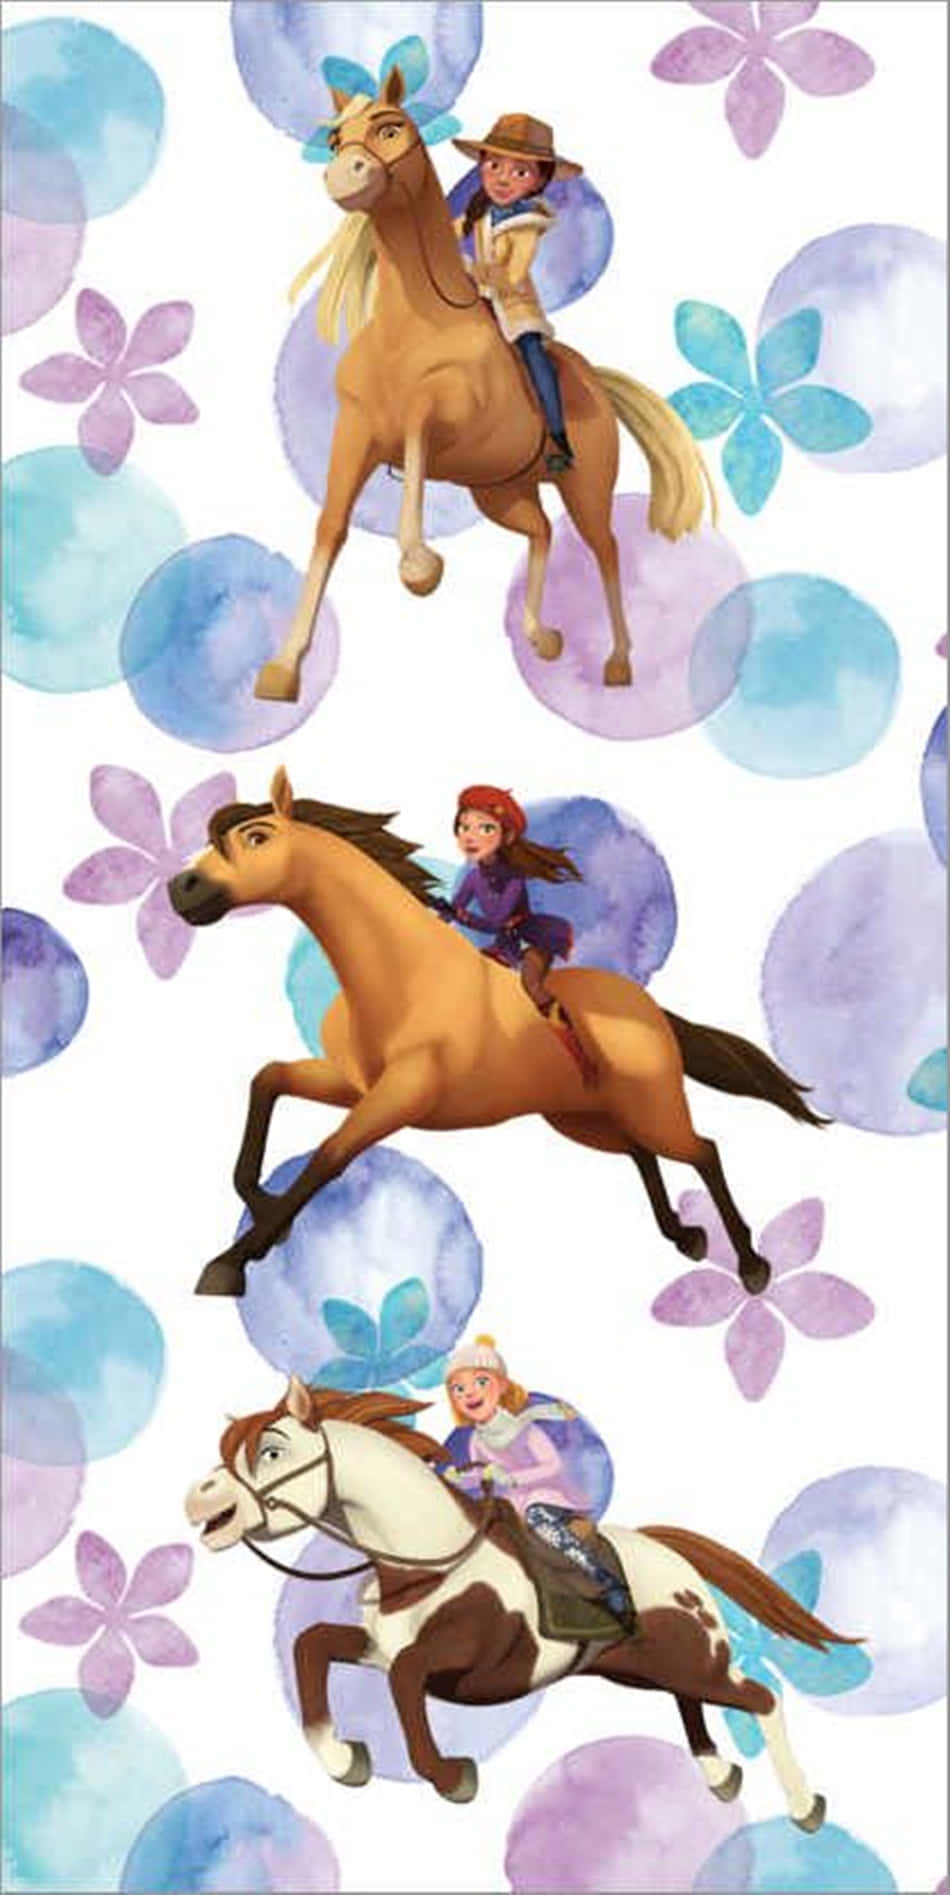 Get ready for a wild ride with Spirit Riding Free Wallpaper